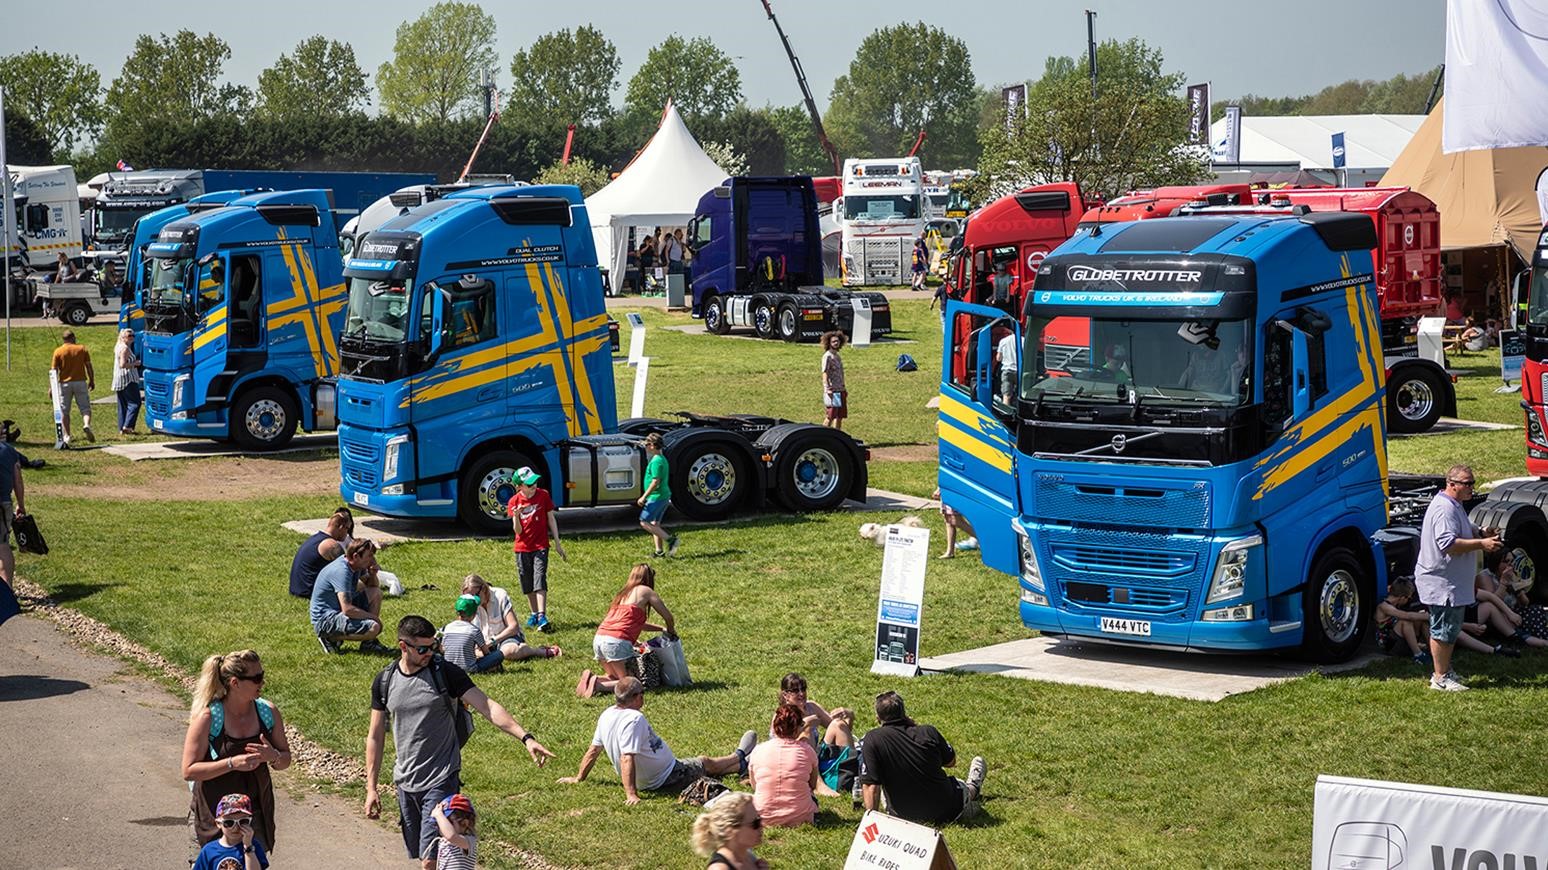 Volvo To Display 17 Vehicles At Truckfest 2019 In Peterborough, Including FH & FM Range Trucks